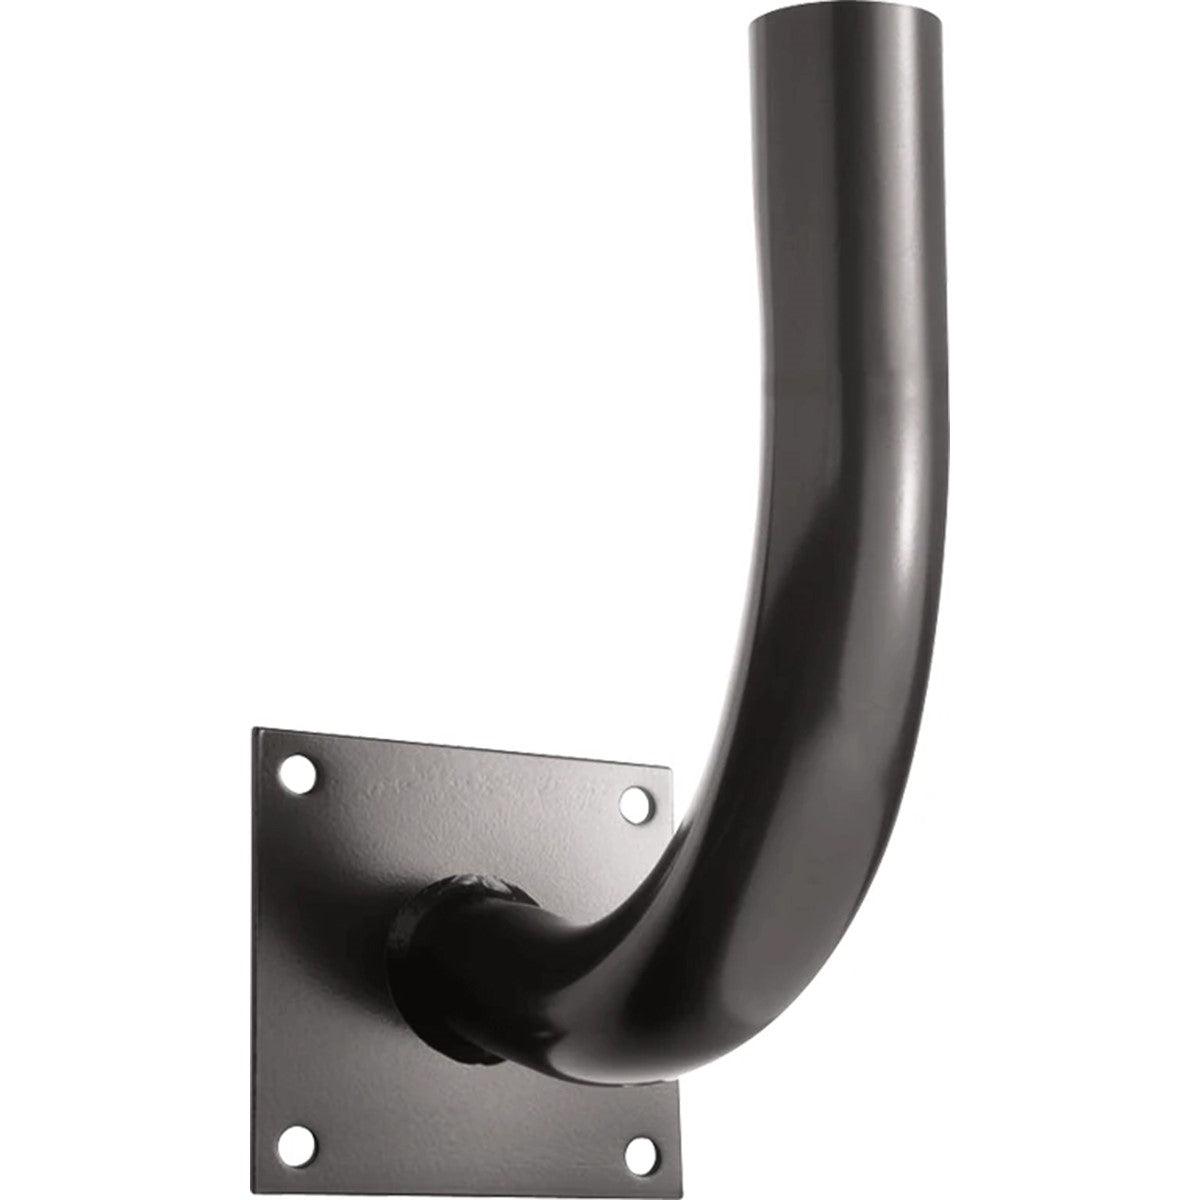 RAB Lighting MCB Poles Bracket Curved Wall Mount 12 Inches X 13 Inches, Bronze Finish